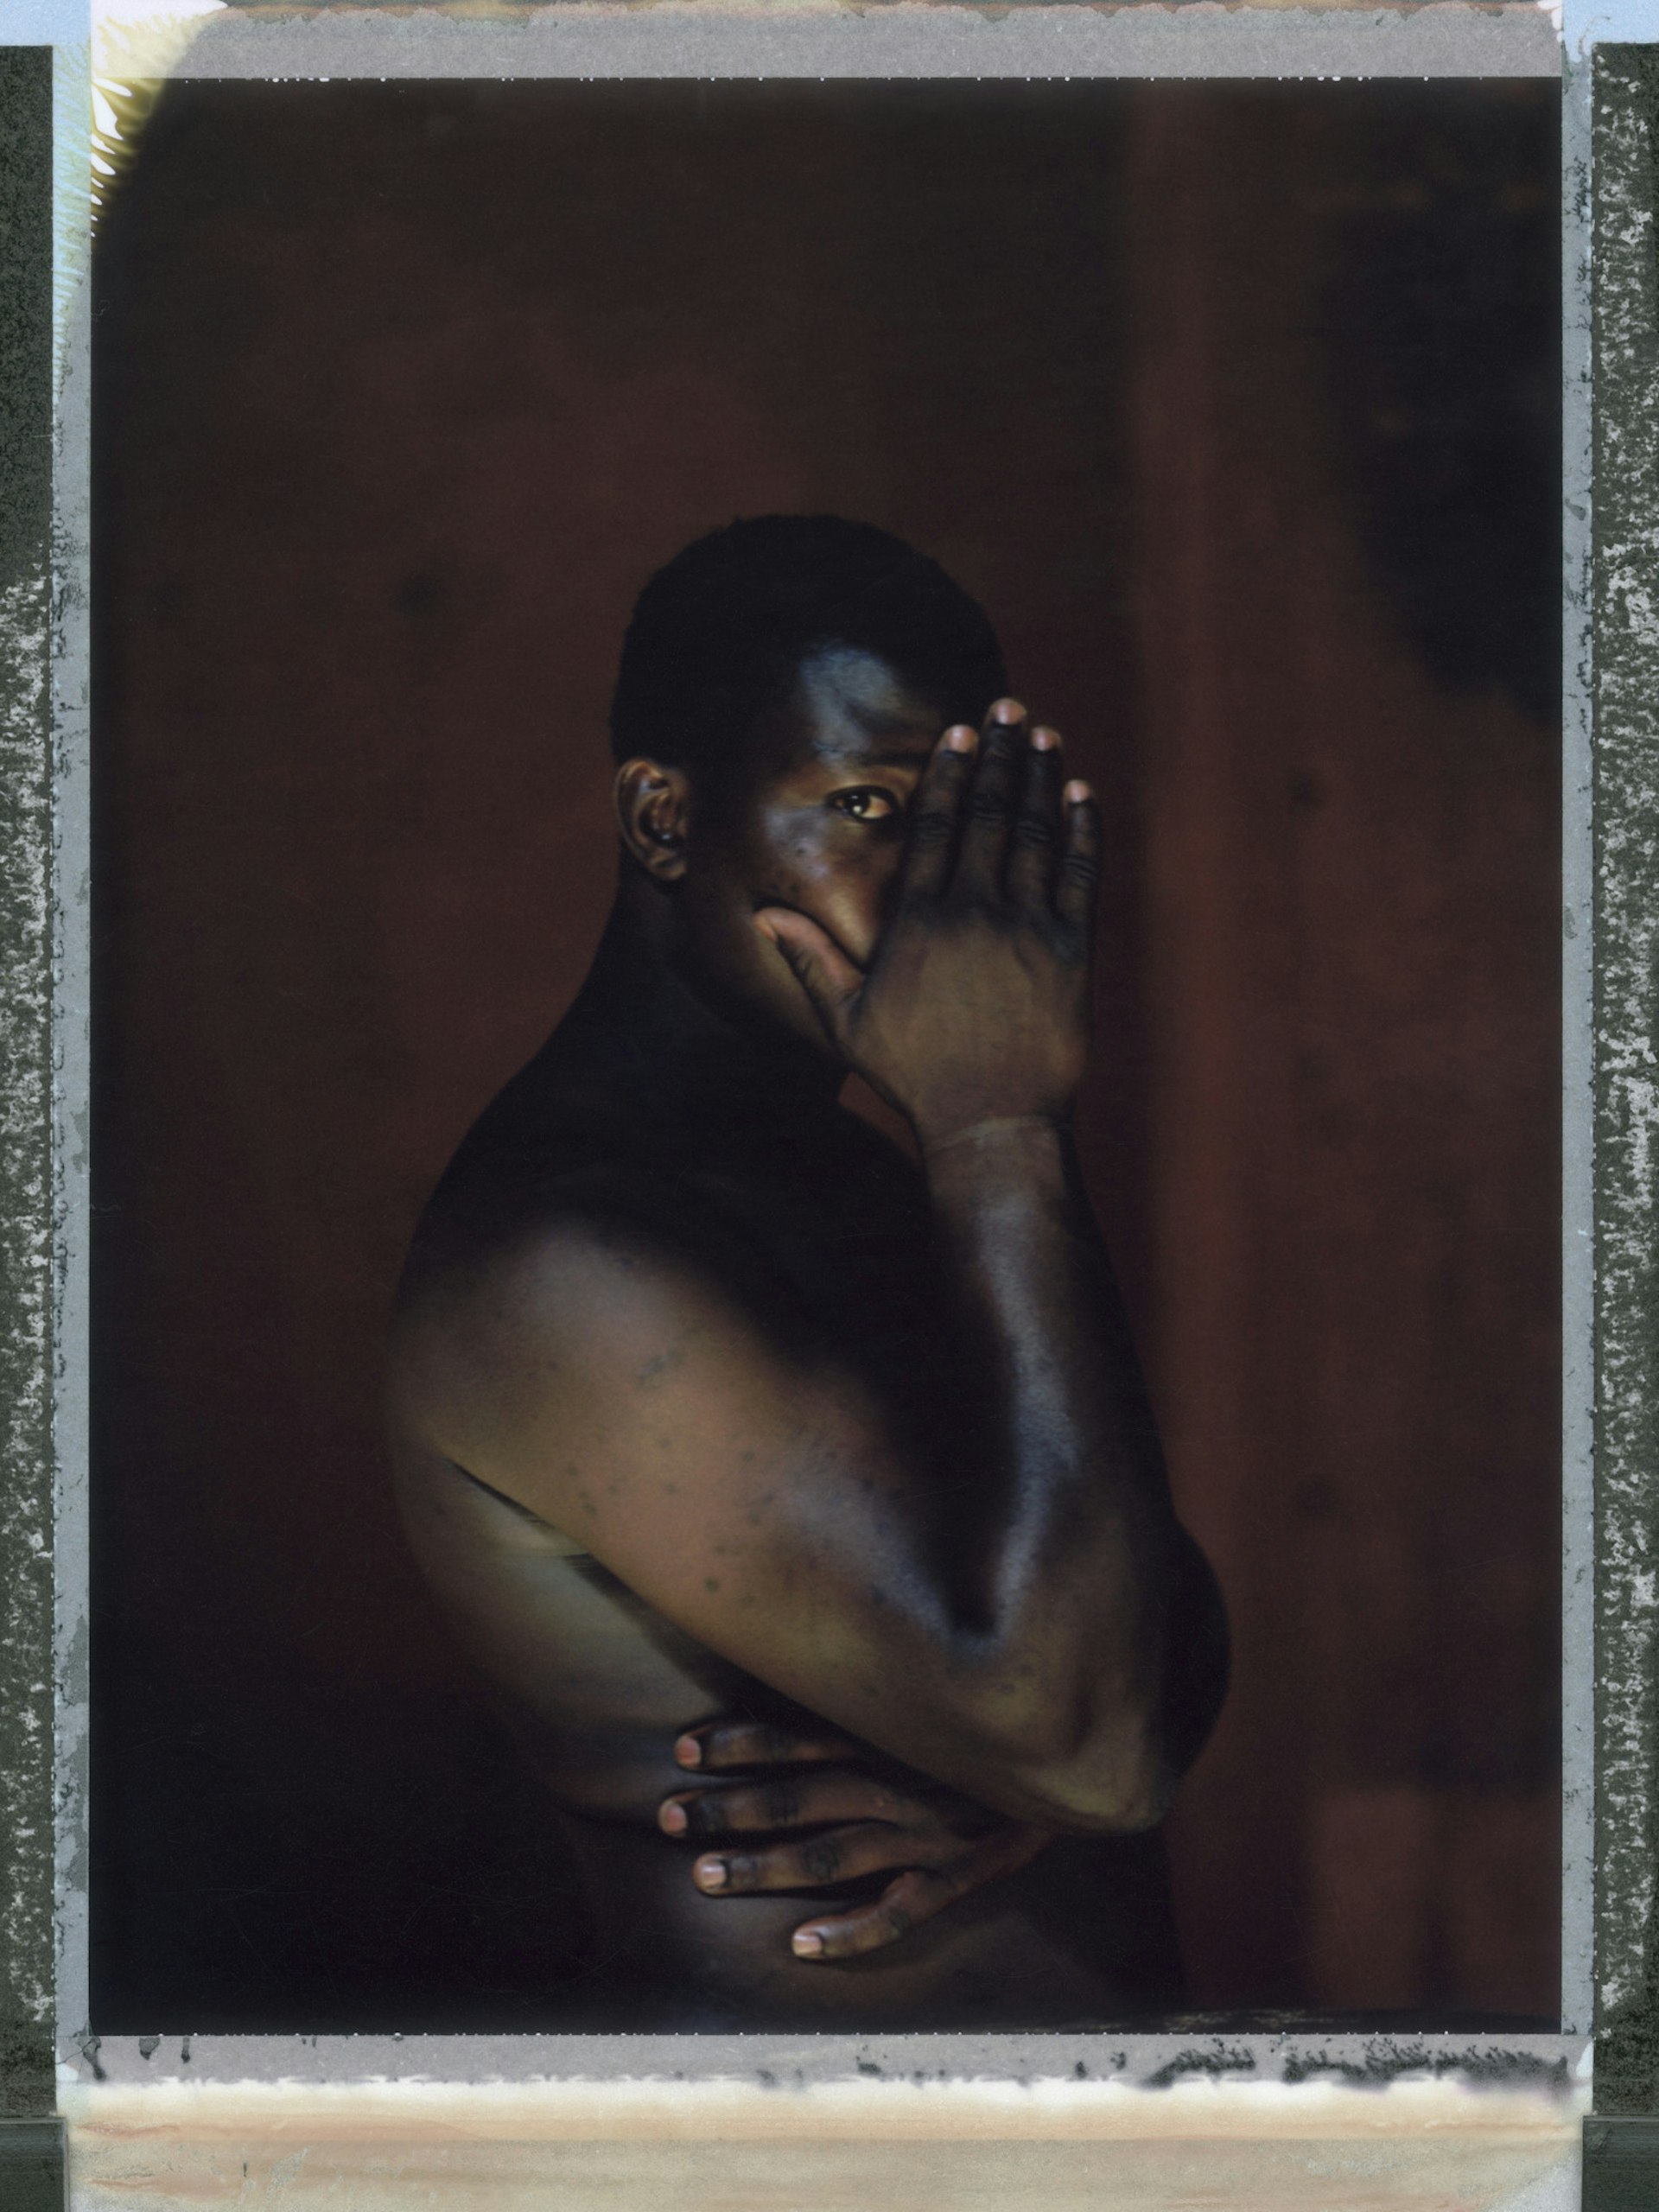 Buje, Nigeria: arrested, tortured and ostracised for being gay. Photo by Robin Hammond